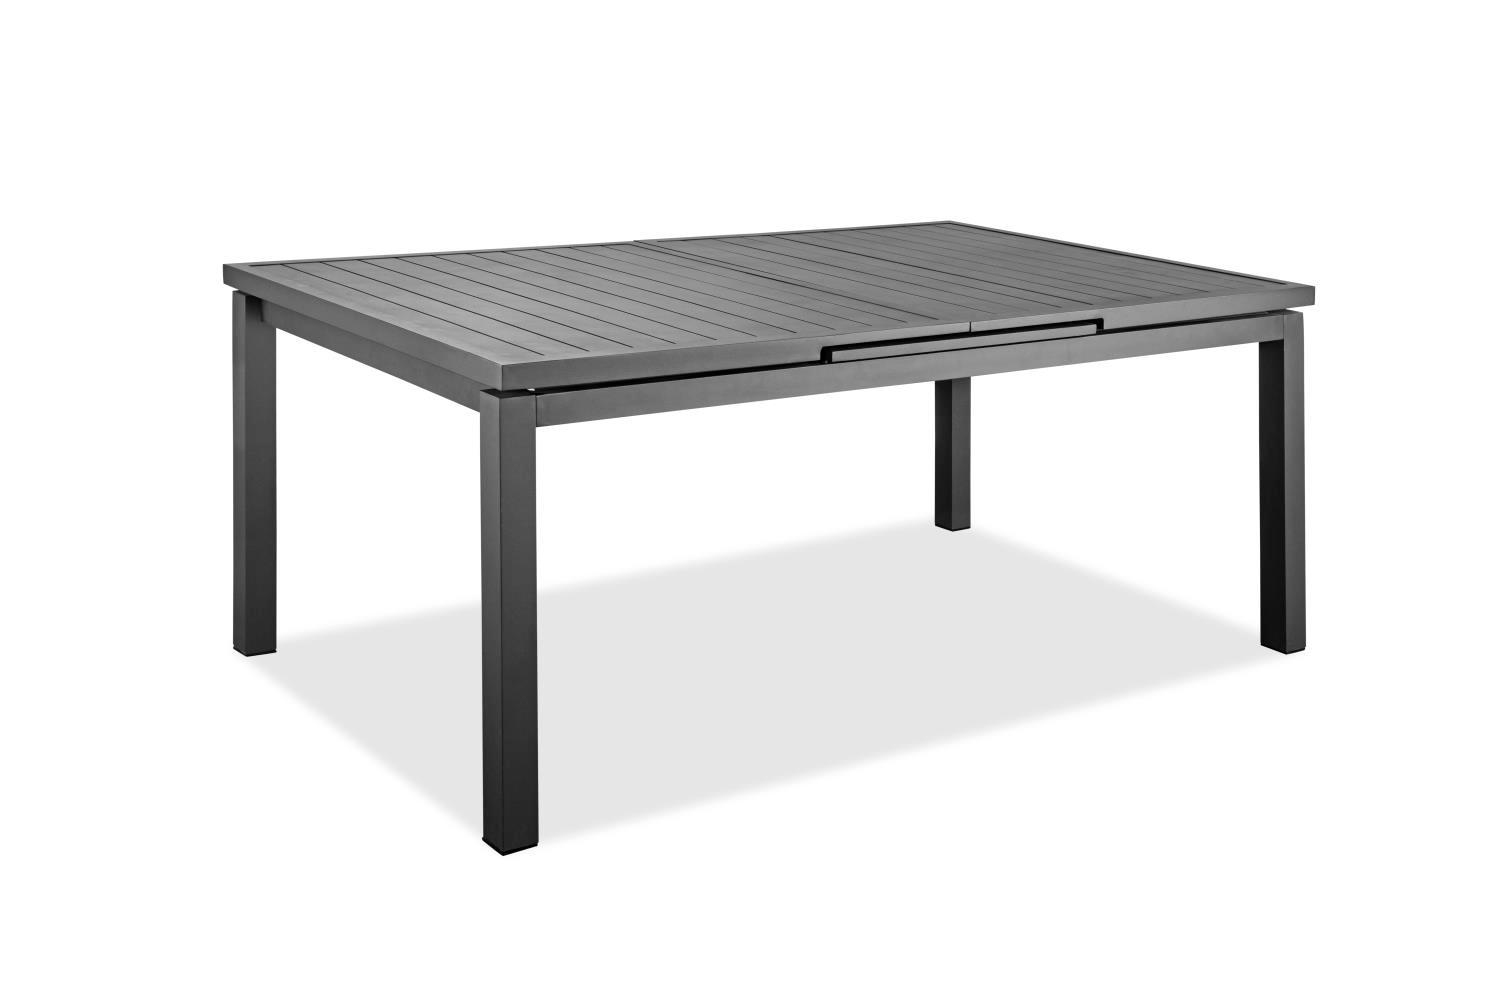 Whiteline Alum Indoor Outdoor Extendable Dining Table In Grey DT1567-GRY